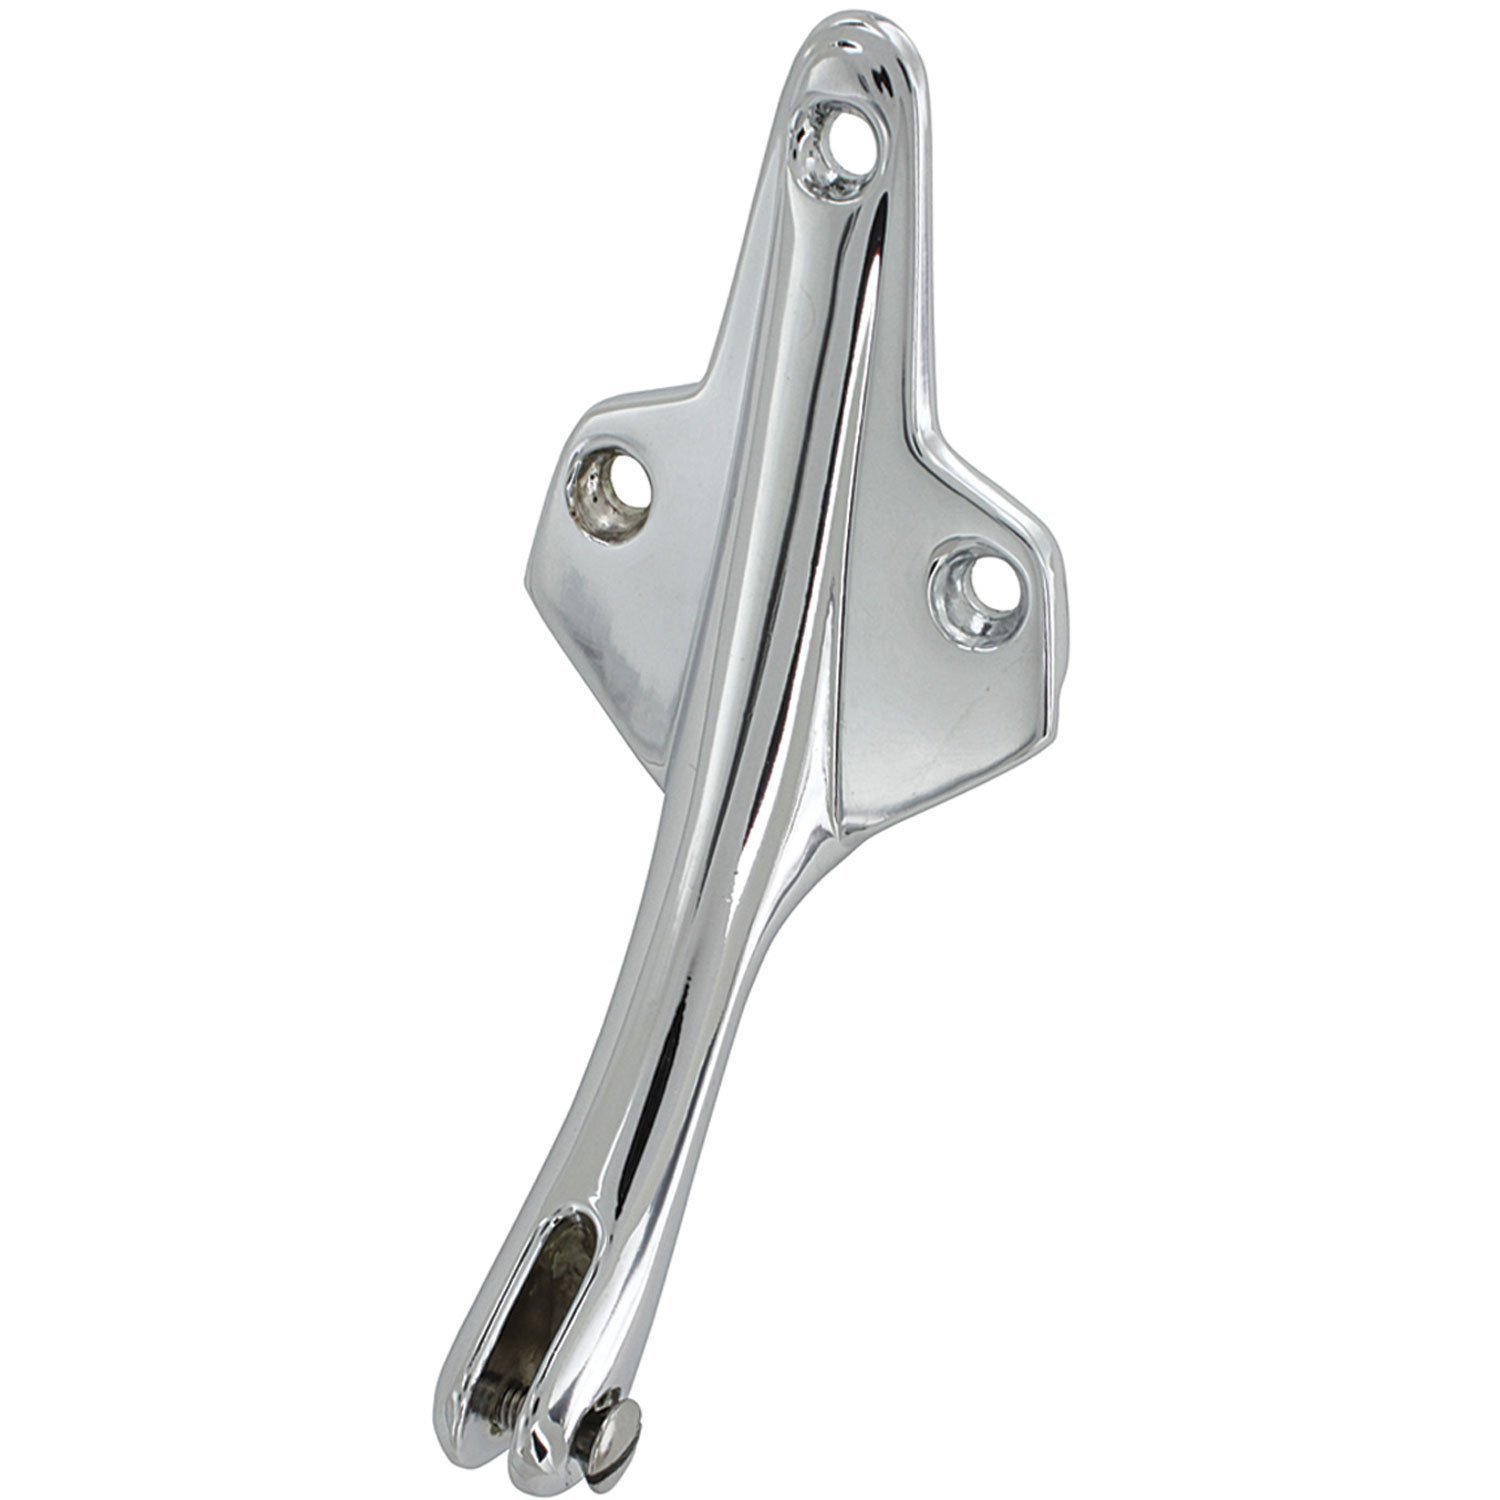 Inside Mirror Support Bracket for 1964-1965 Chevrolet Chevelle, El Camino, Coupe